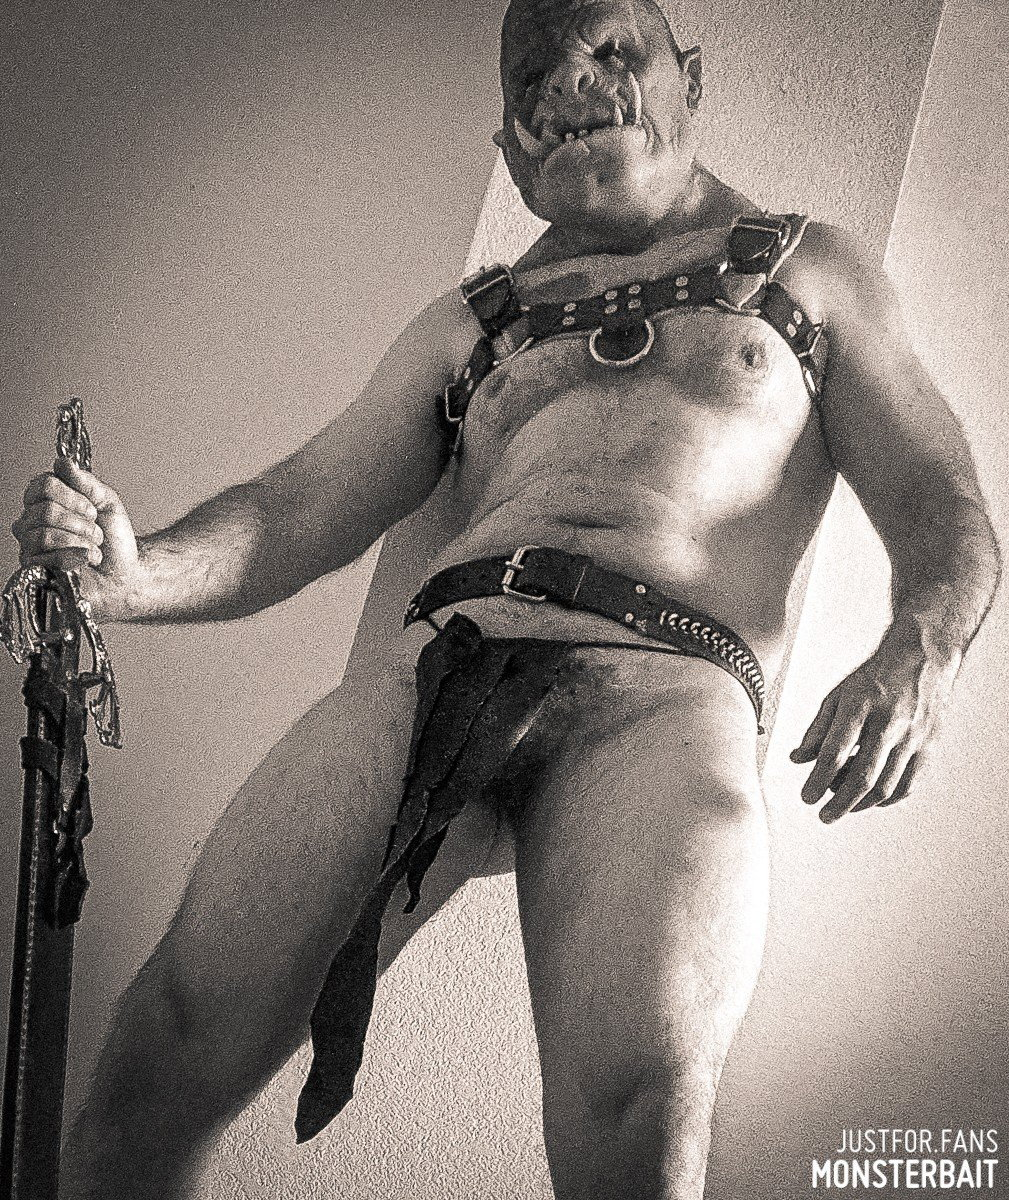 Photo by Monsterbait with the username @Monsterbait, who is a star user,  March 28, 2022 at 4:26 PM. The post is about the topic GayExTumblr and the text says 'Orc me daddy! 
More shots up for subscribers! 

#orc #ogre #monster #ork #mask #men #male #gay #man #pinup #leather #kink #fetish #cosplay #warrior #barbarian'